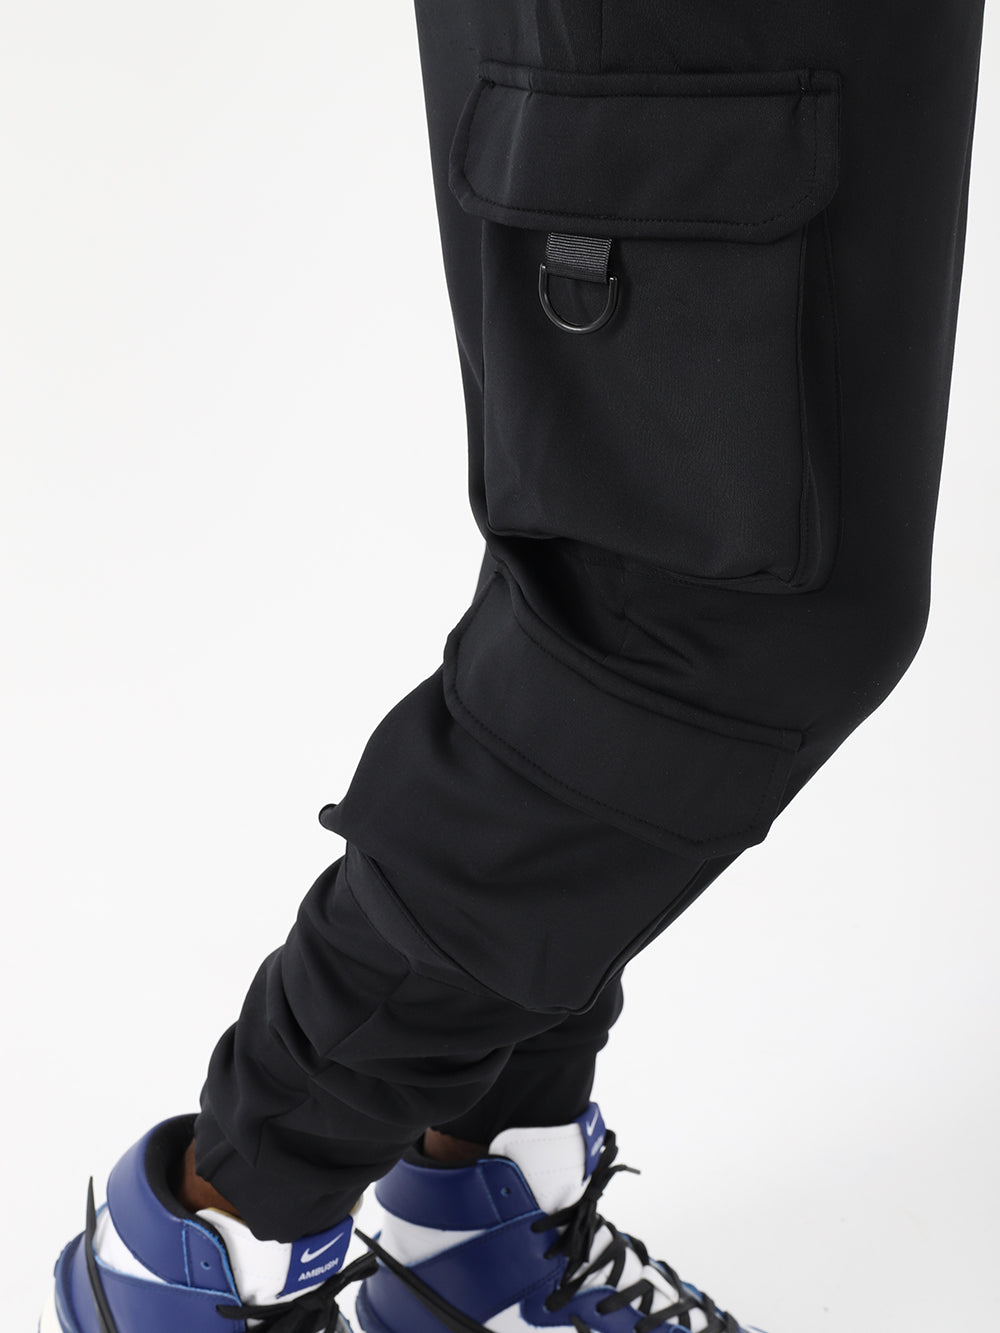 A man wearing black VENTURA joggers with adjustable ankle cuffs and blue sneakers.